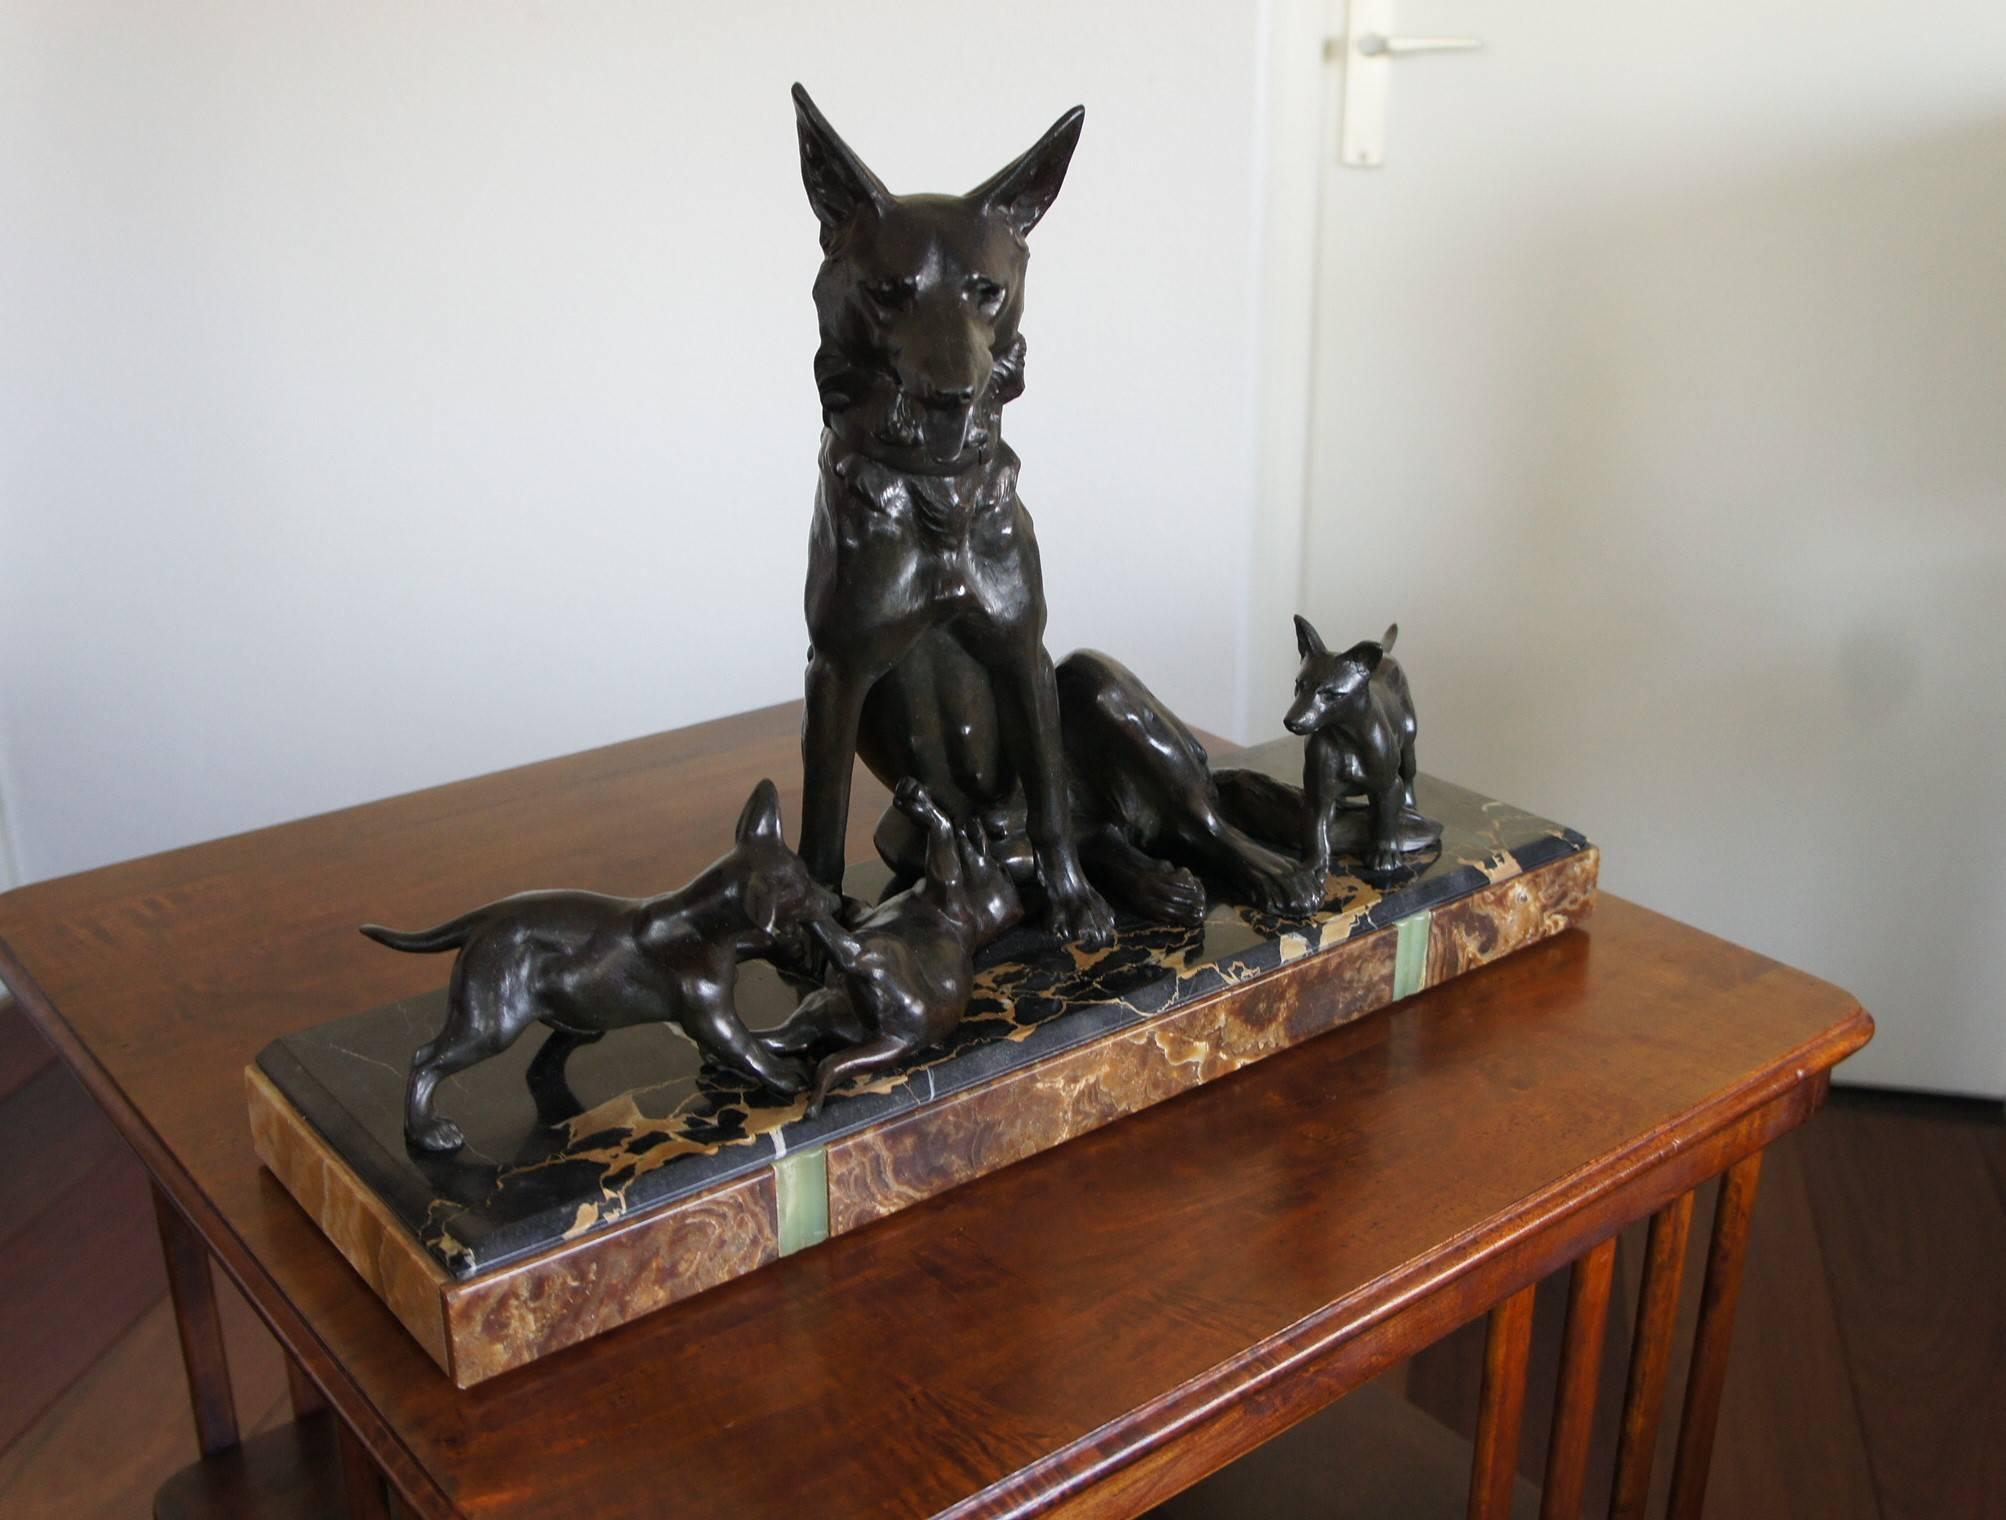 Wonderful sculpture of a dog family.

This mother of three looks patient and confident at the same time. It sure seems like it is a hot day, because she has her mouth open and her tongue is sticking out. Her offspring can lead a careless life and